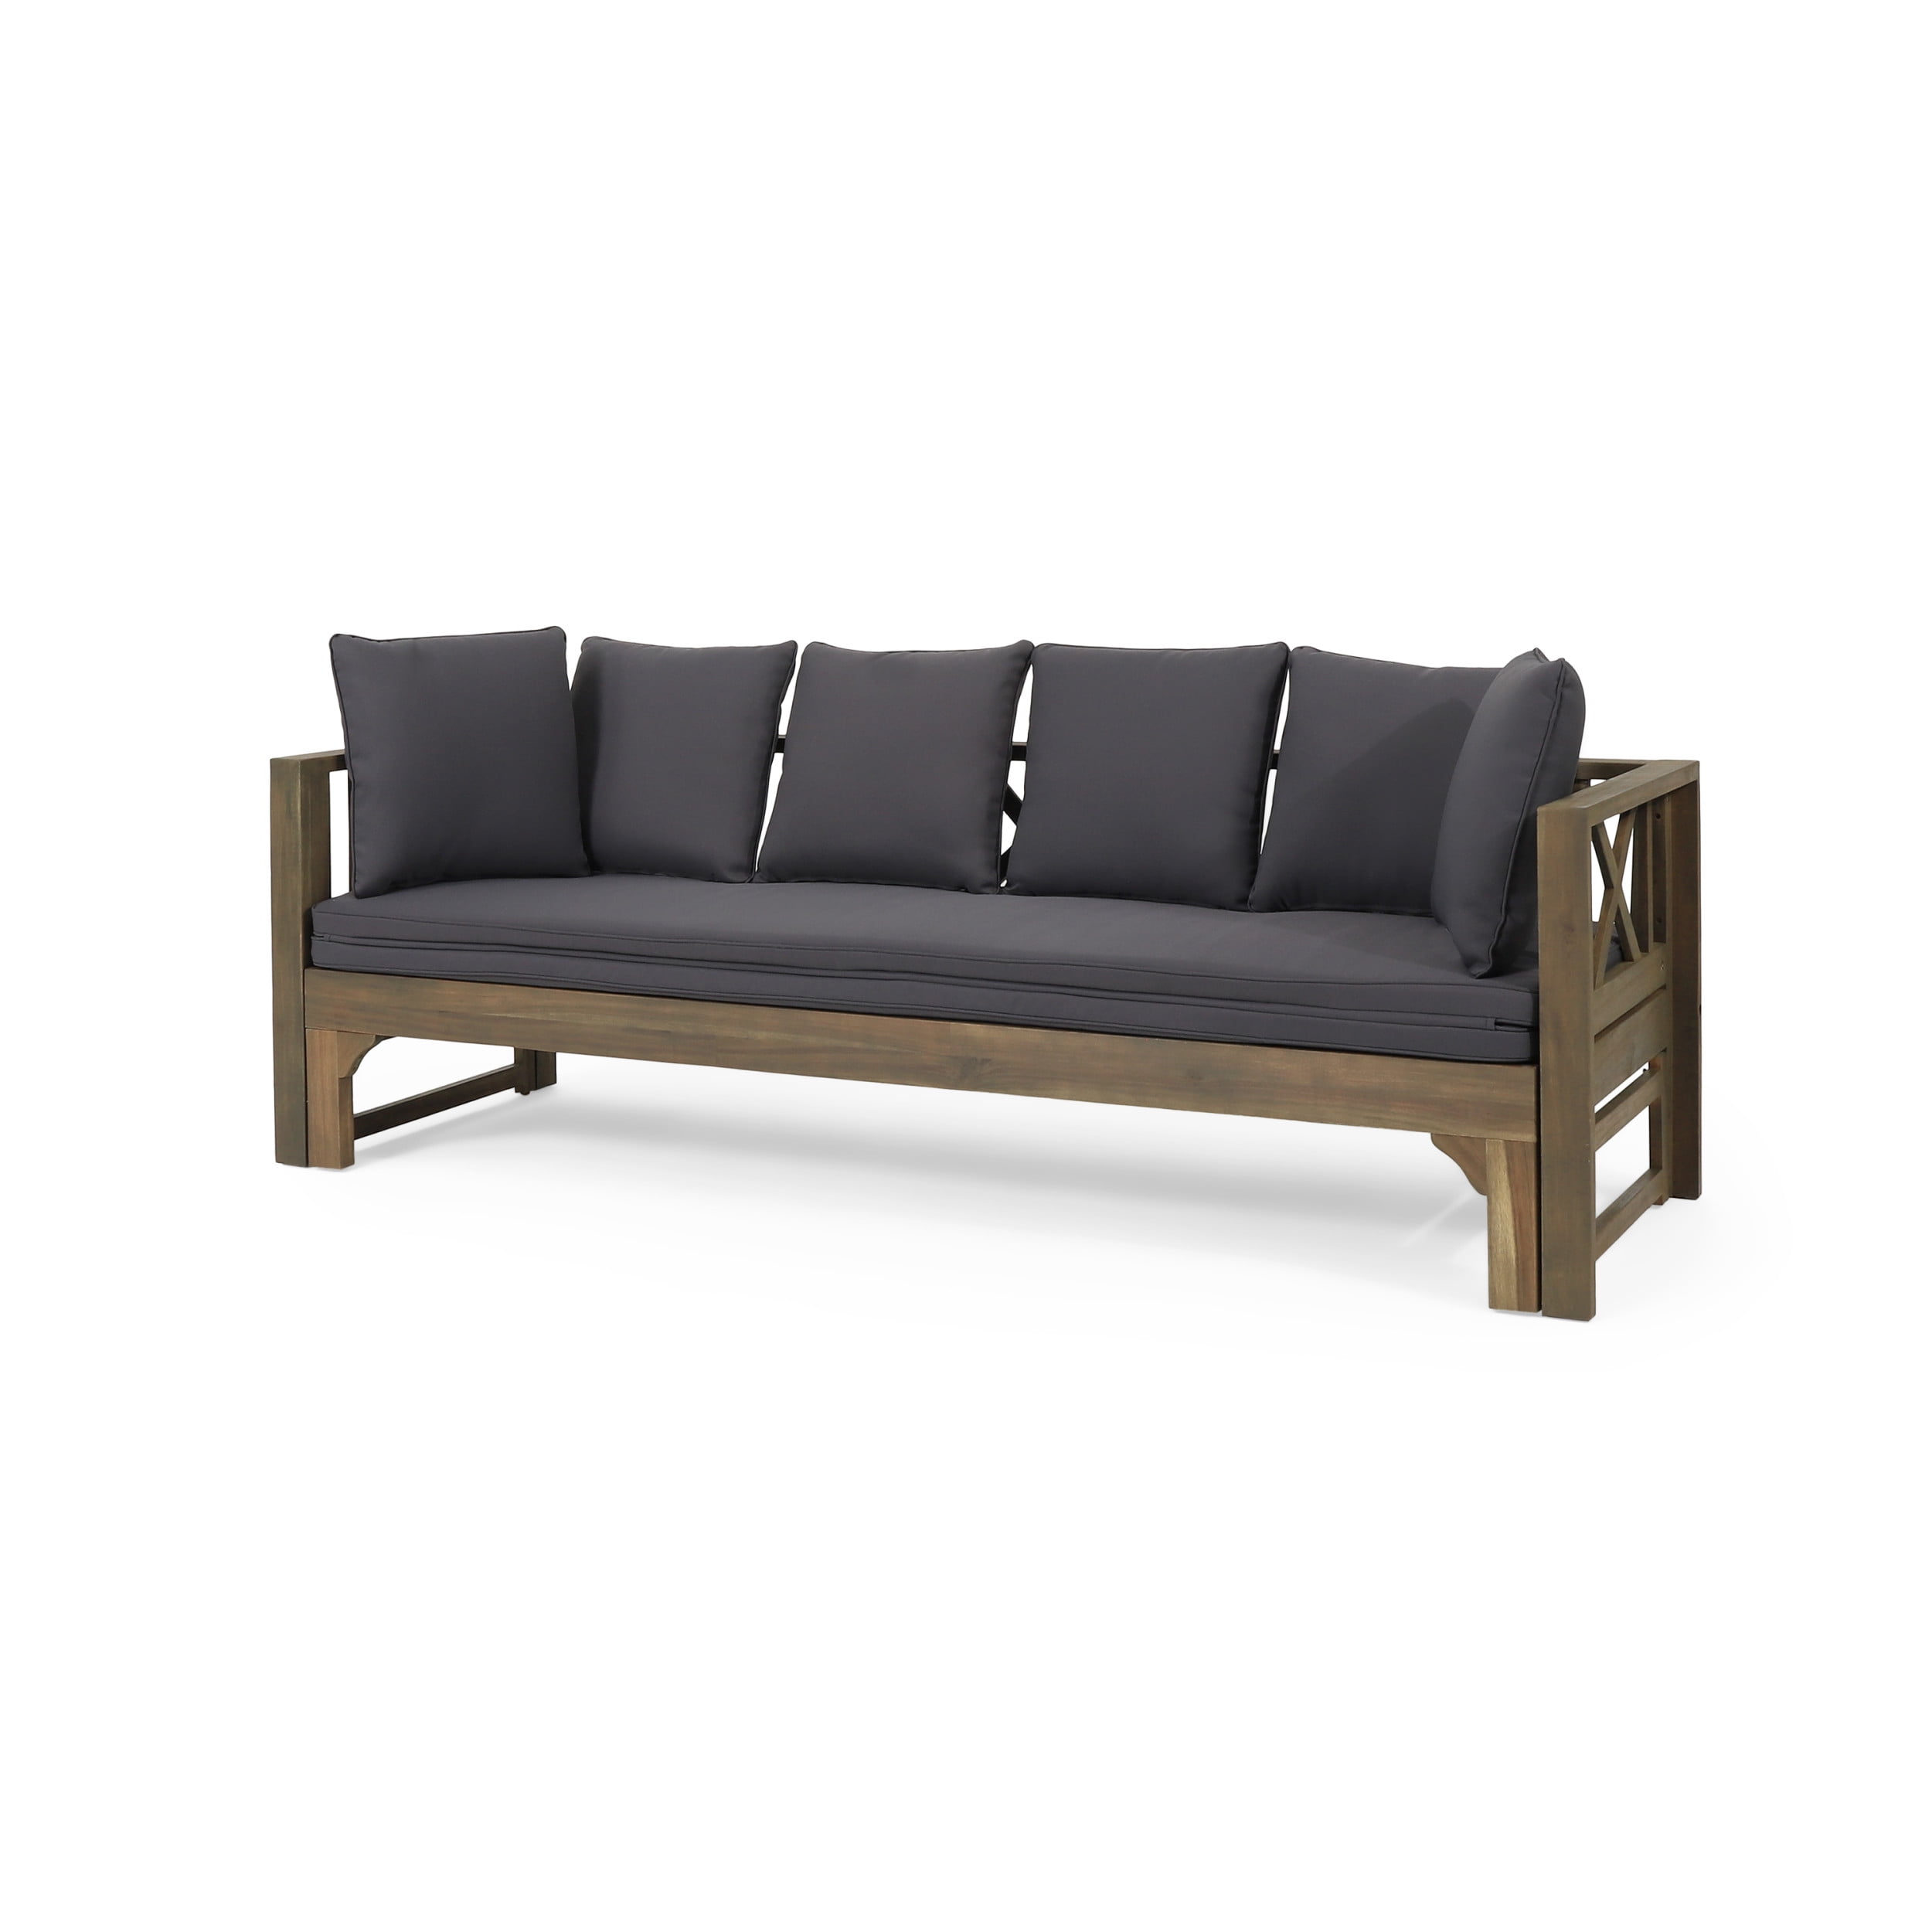 GDF Studio Camille Outdoor Extendable Sofa, Daybed Acacia Teal and Wood Teak Dark